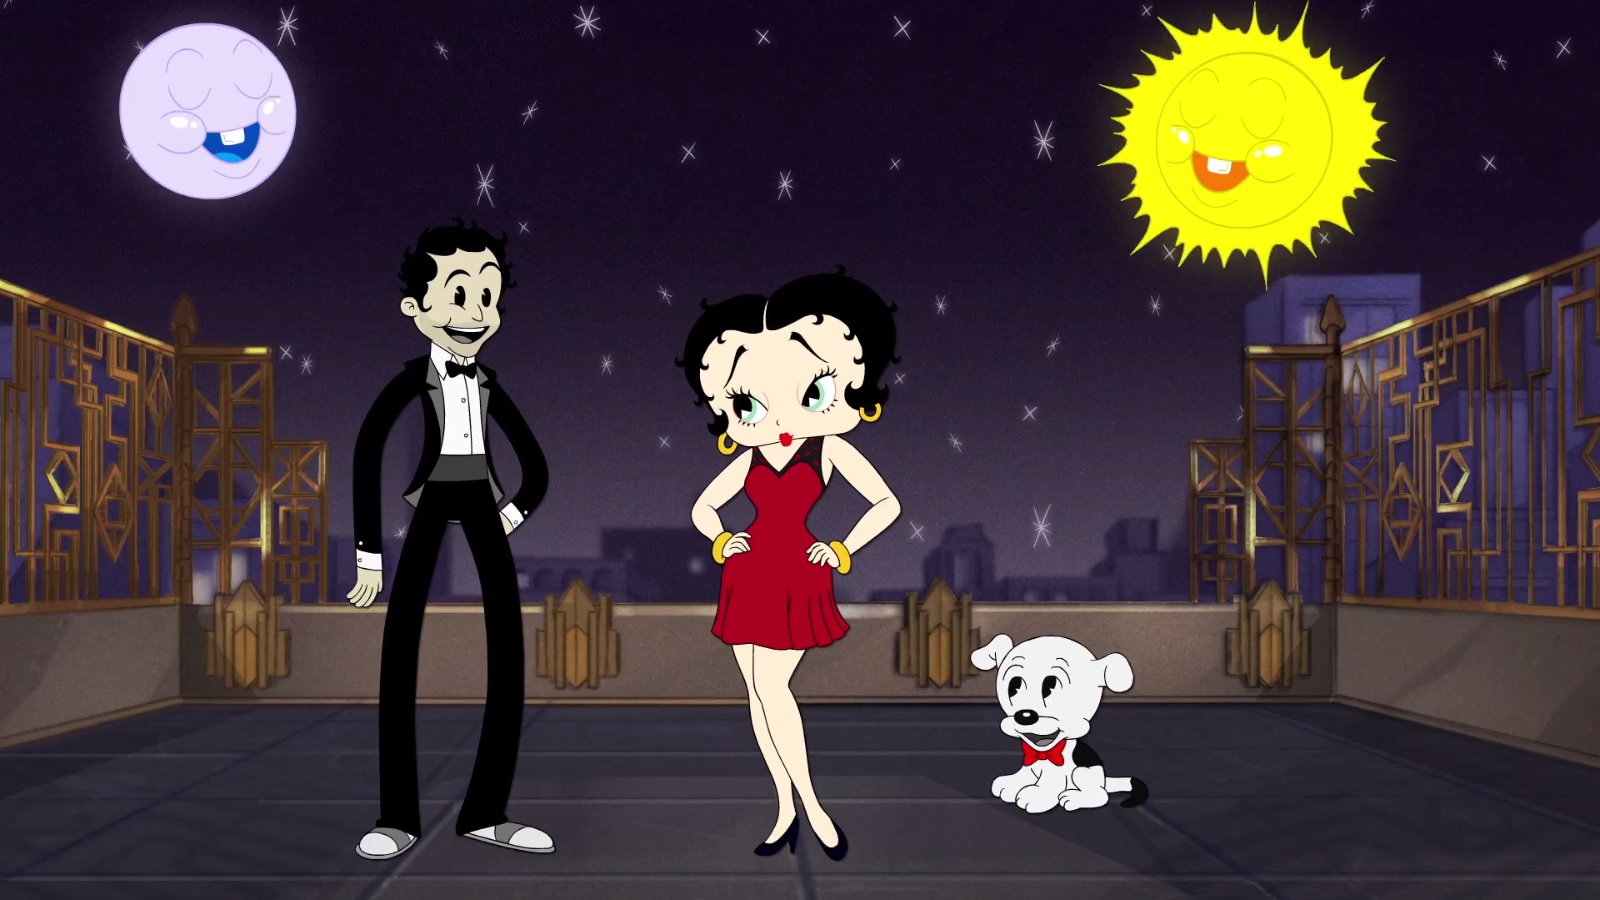 Zac Posen Is the Star of New Animated Betty Boop Video, Promoting New Dress  Collection